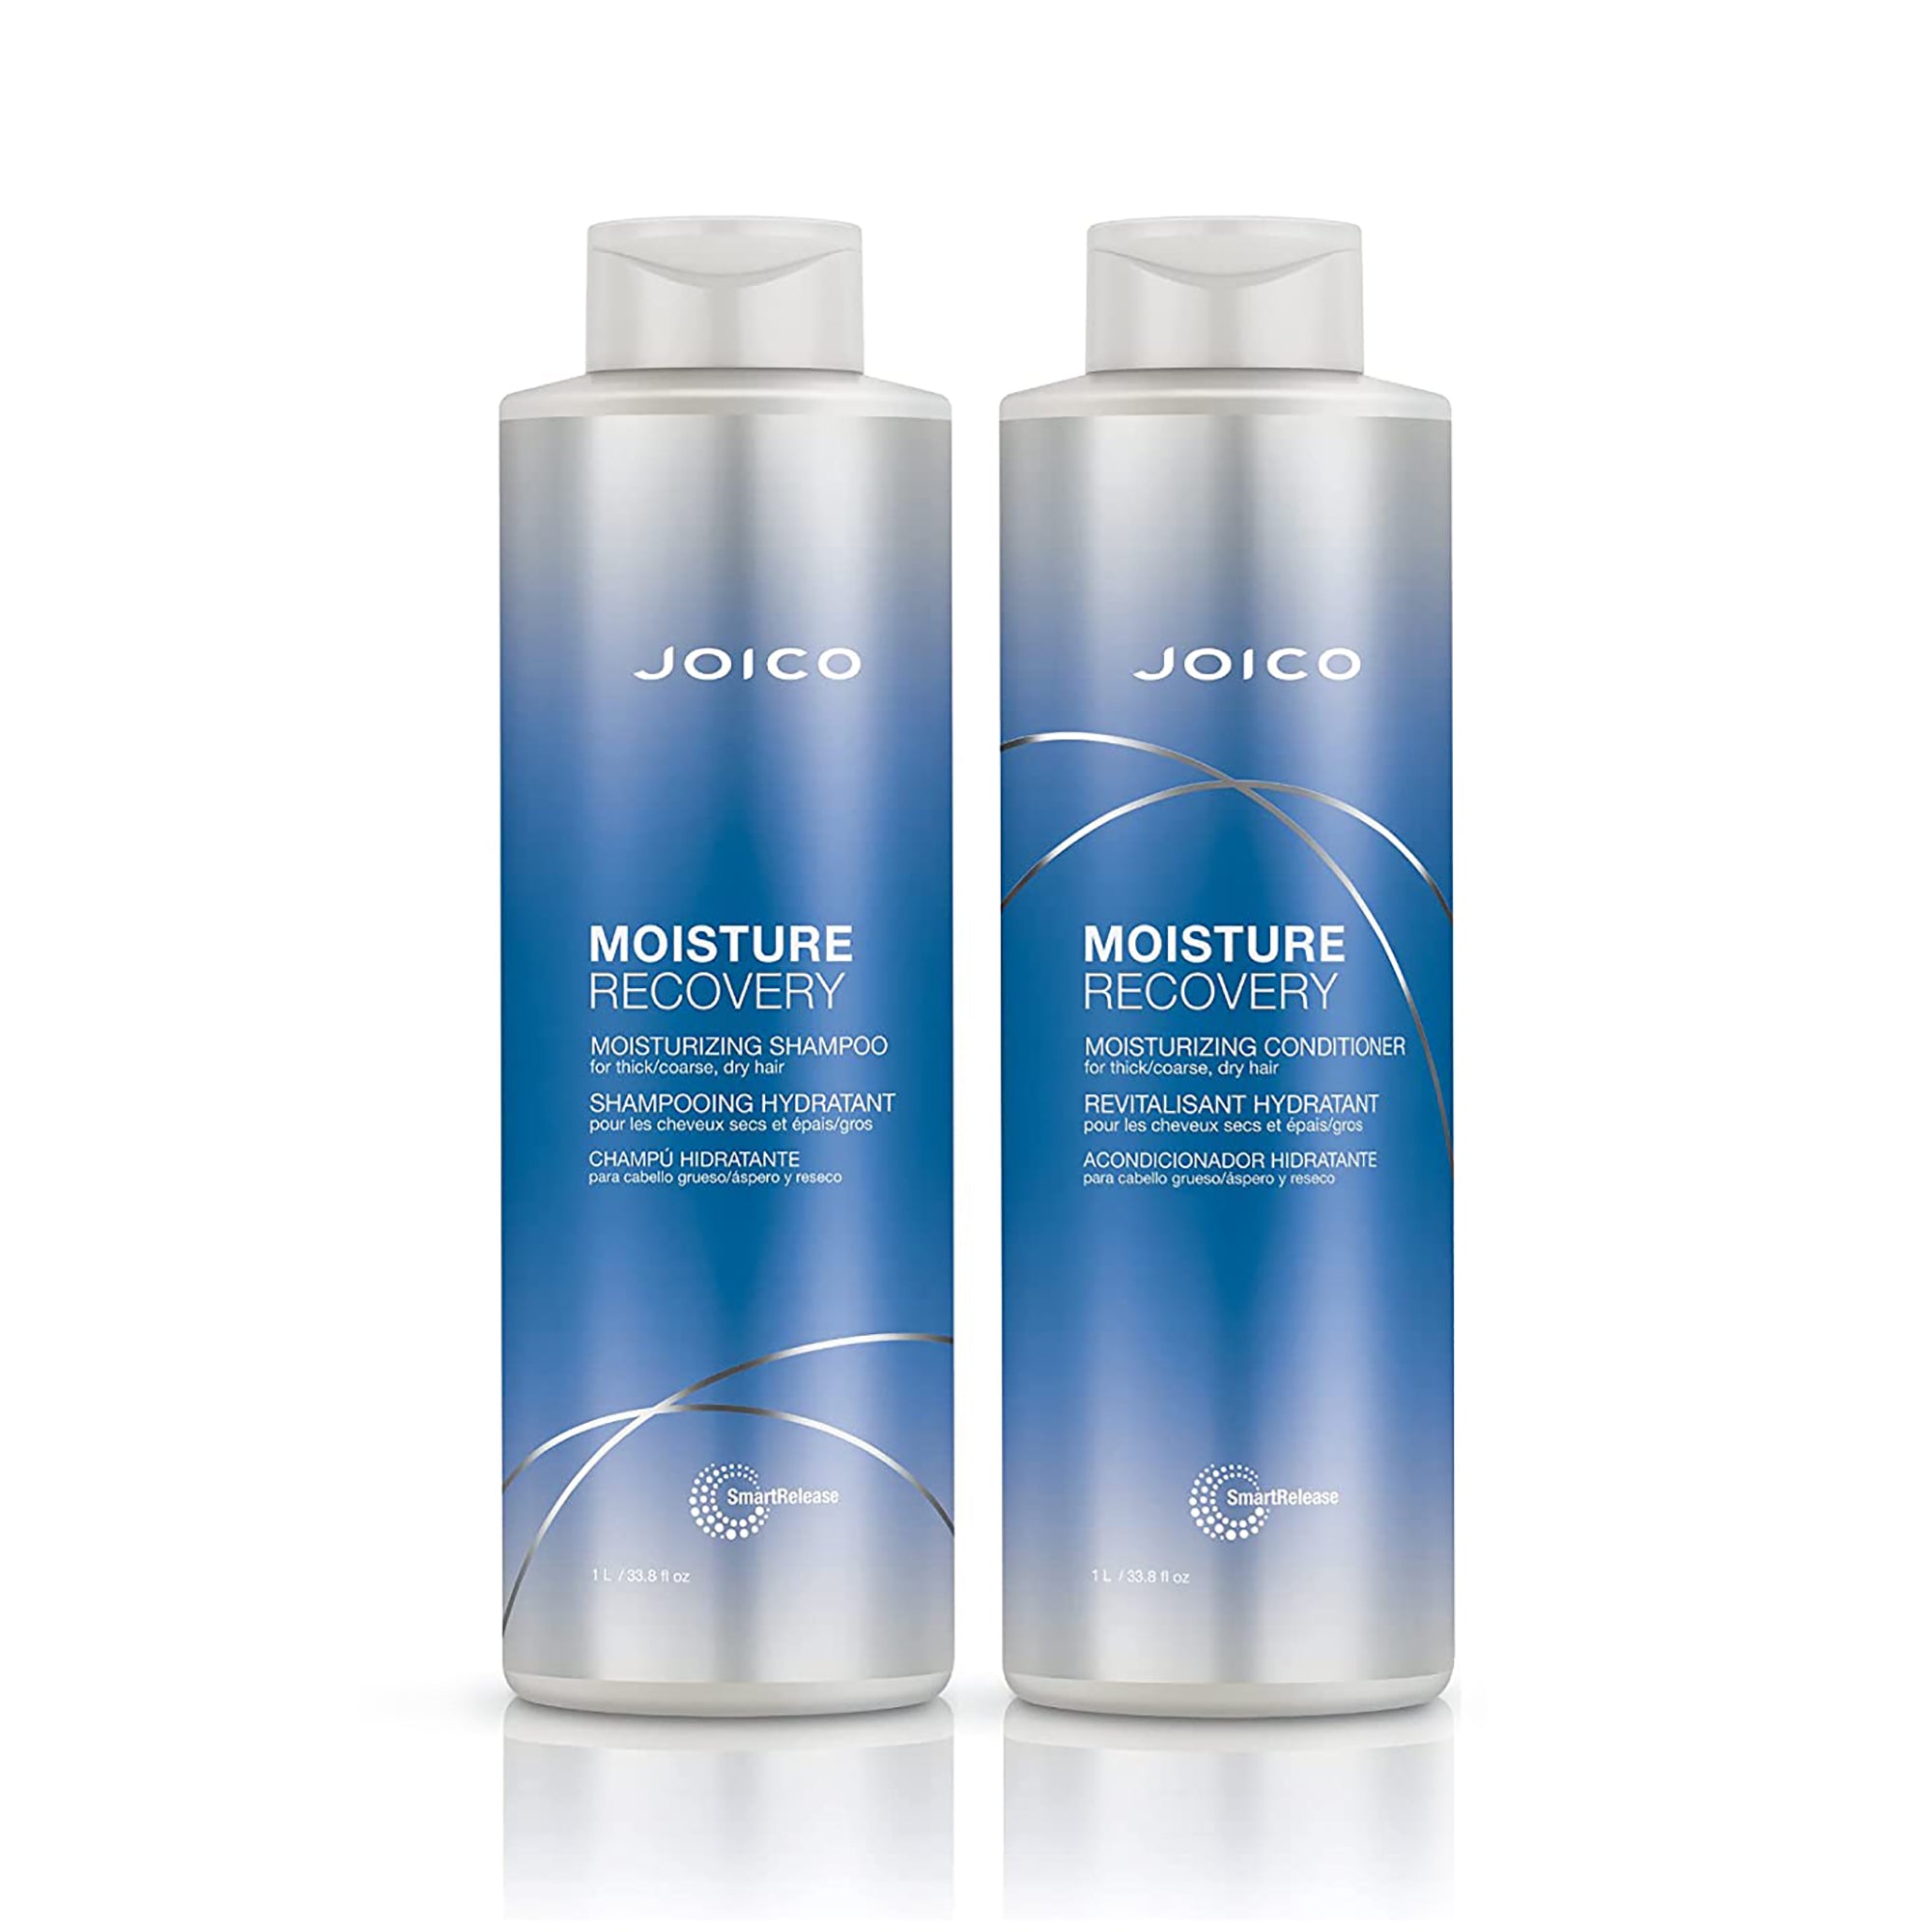 Joico Moisture Recovery and Conditioner - Beauty